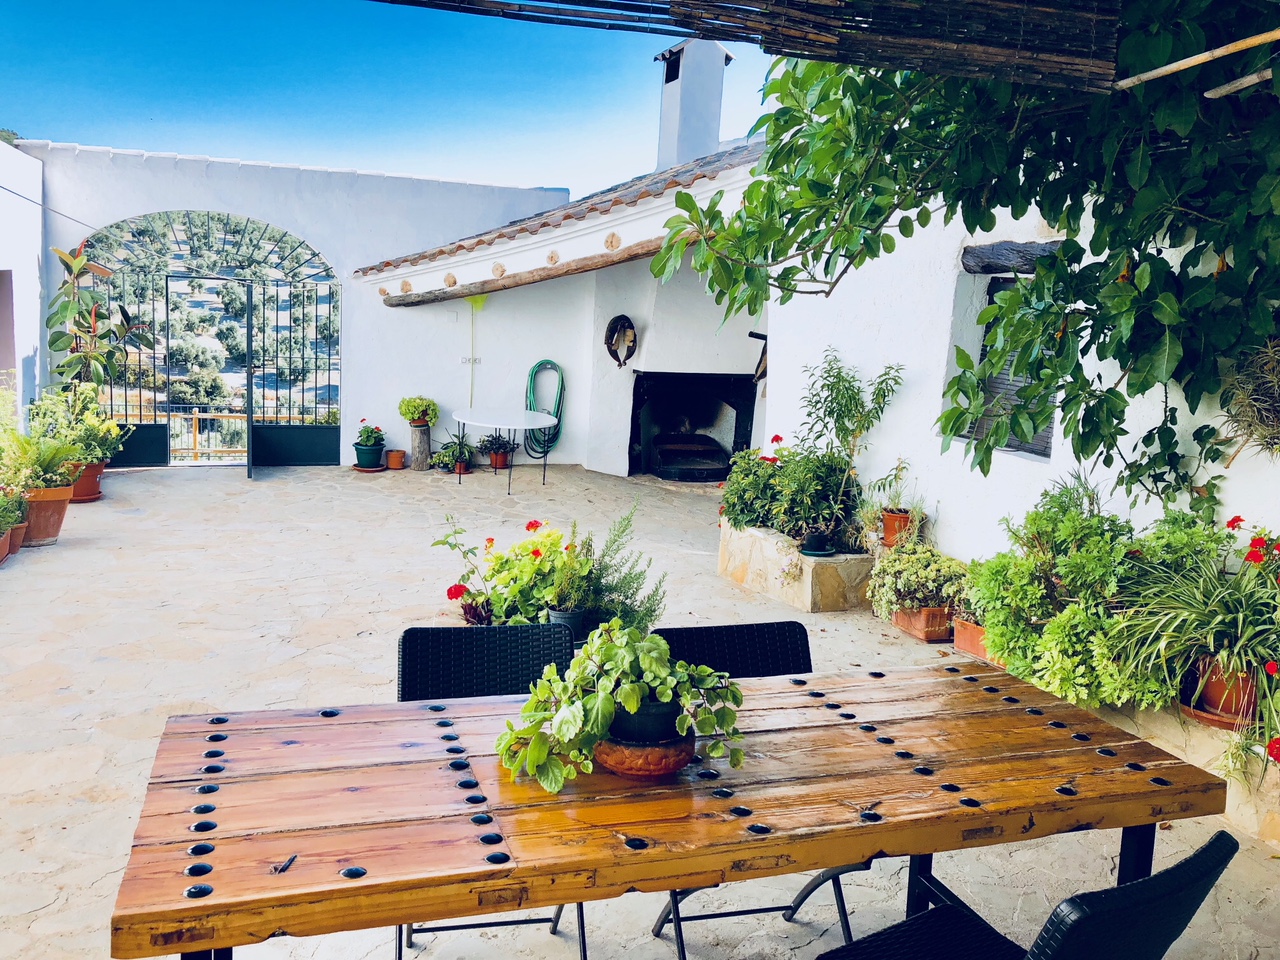 View of a plant-filled courtyard belonging to an Andalusian villa